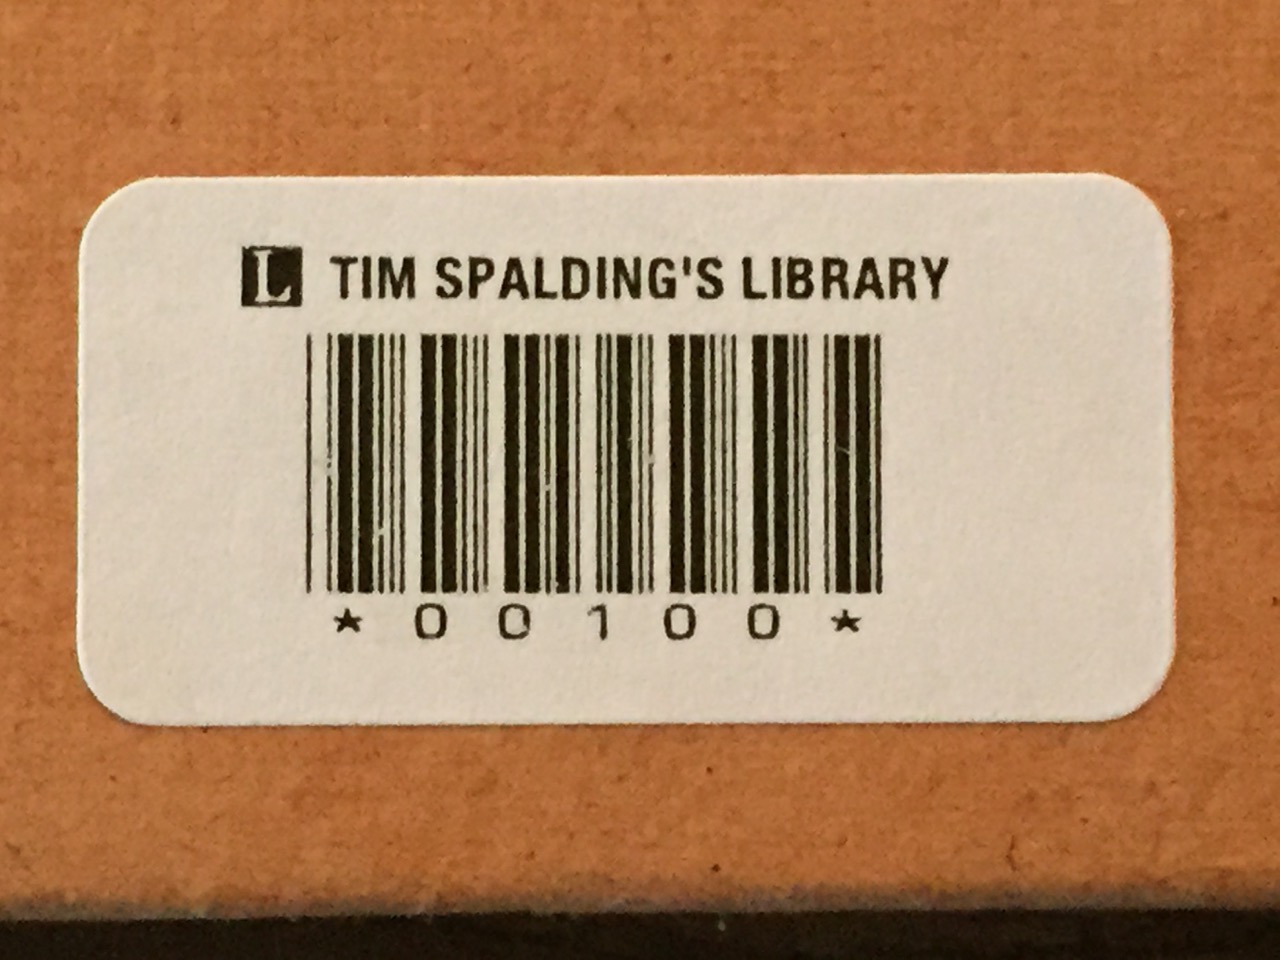 New: Printed Library Barcode Labels « The LibraryThing Blog